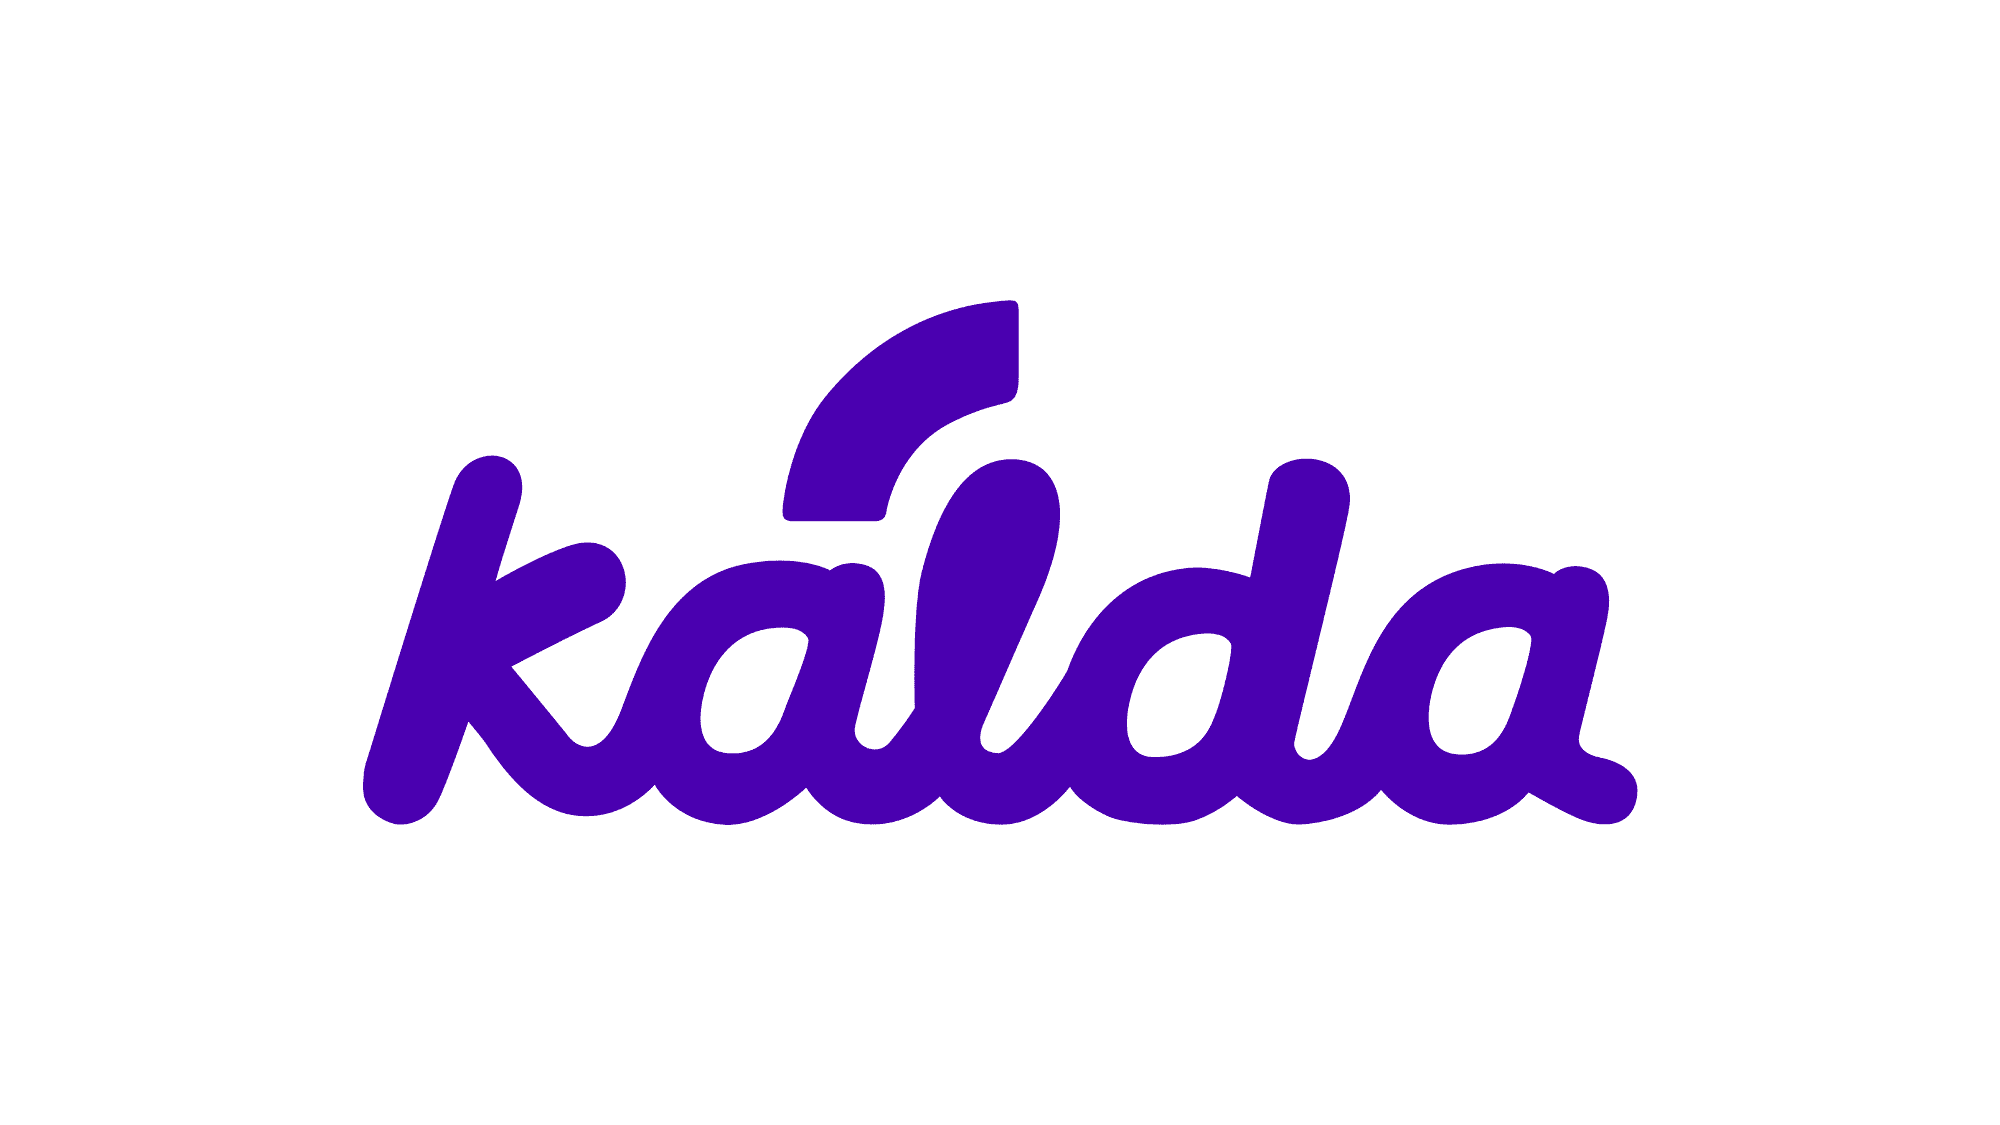 LGBTQIA+ mental wellbeing app, Kalda, launches “Overcoming Loneliness”  digital therapy programme